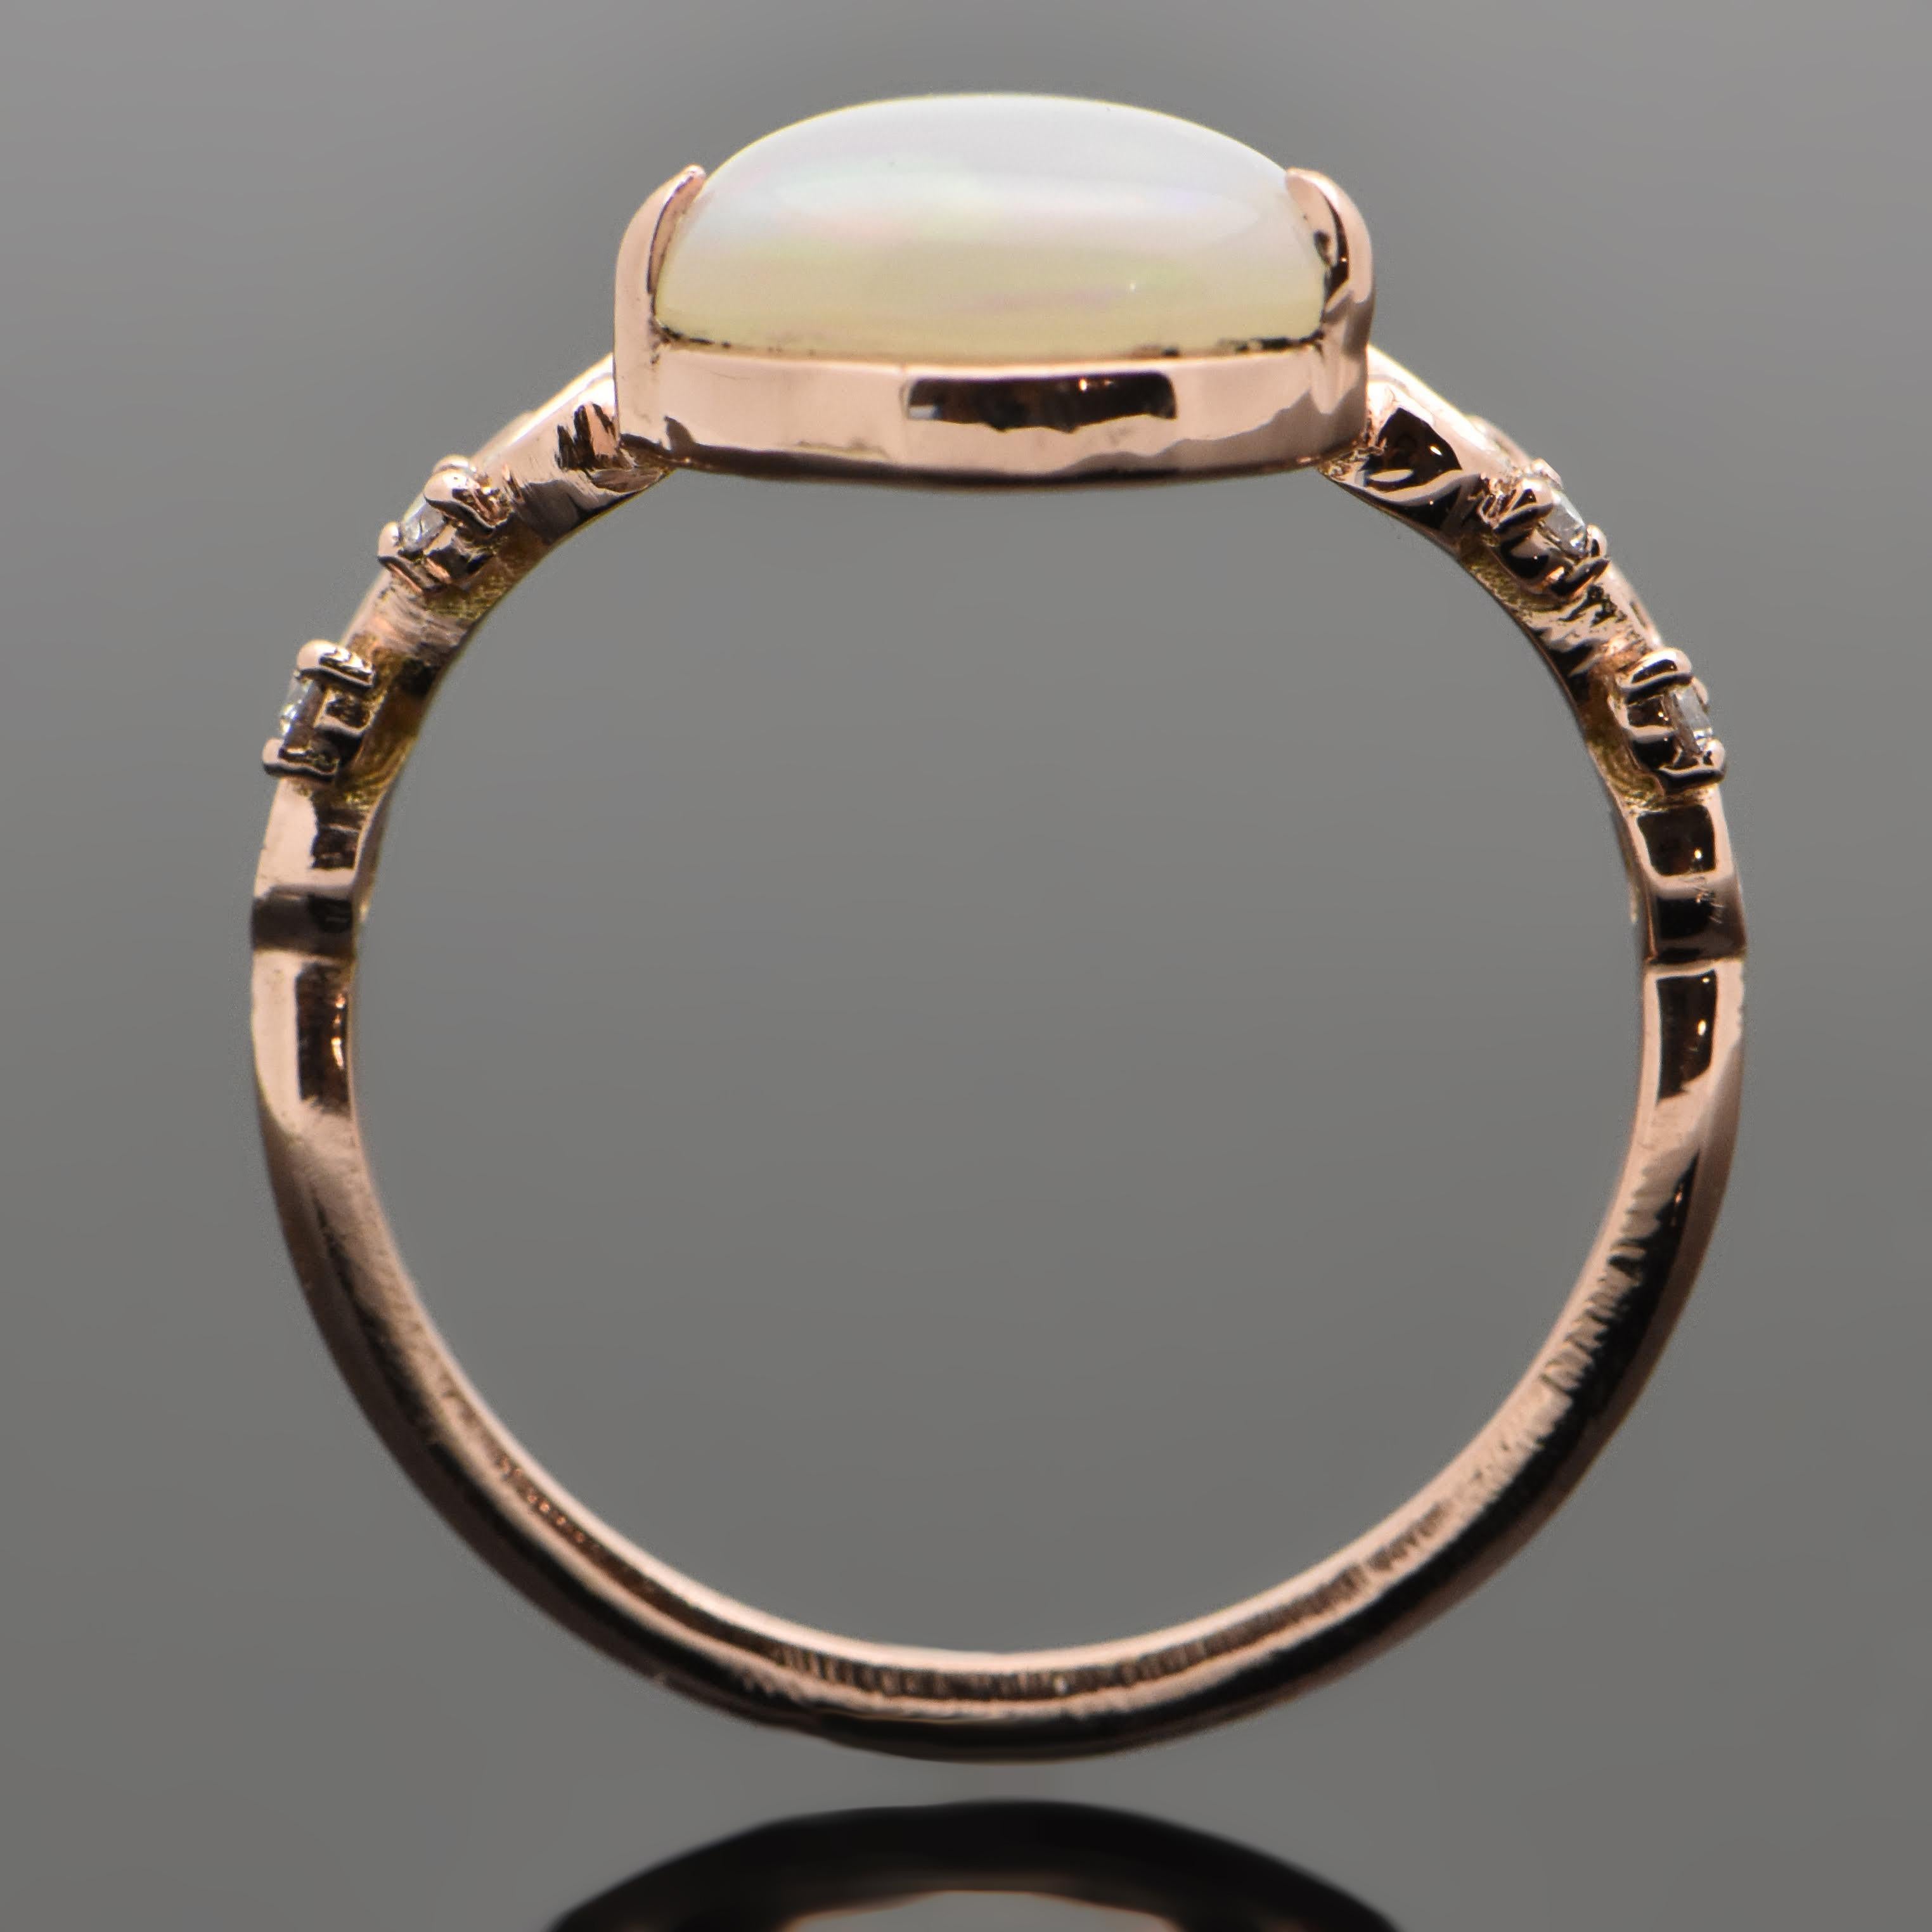 A 14kt rose gold Ethiopian pear shaped opal with an estimated weight of 1.36ct featuring a delicately carved scroll design and accent diamonds. Estimated weight of gold 1.65 gr. 

We will size it for you.